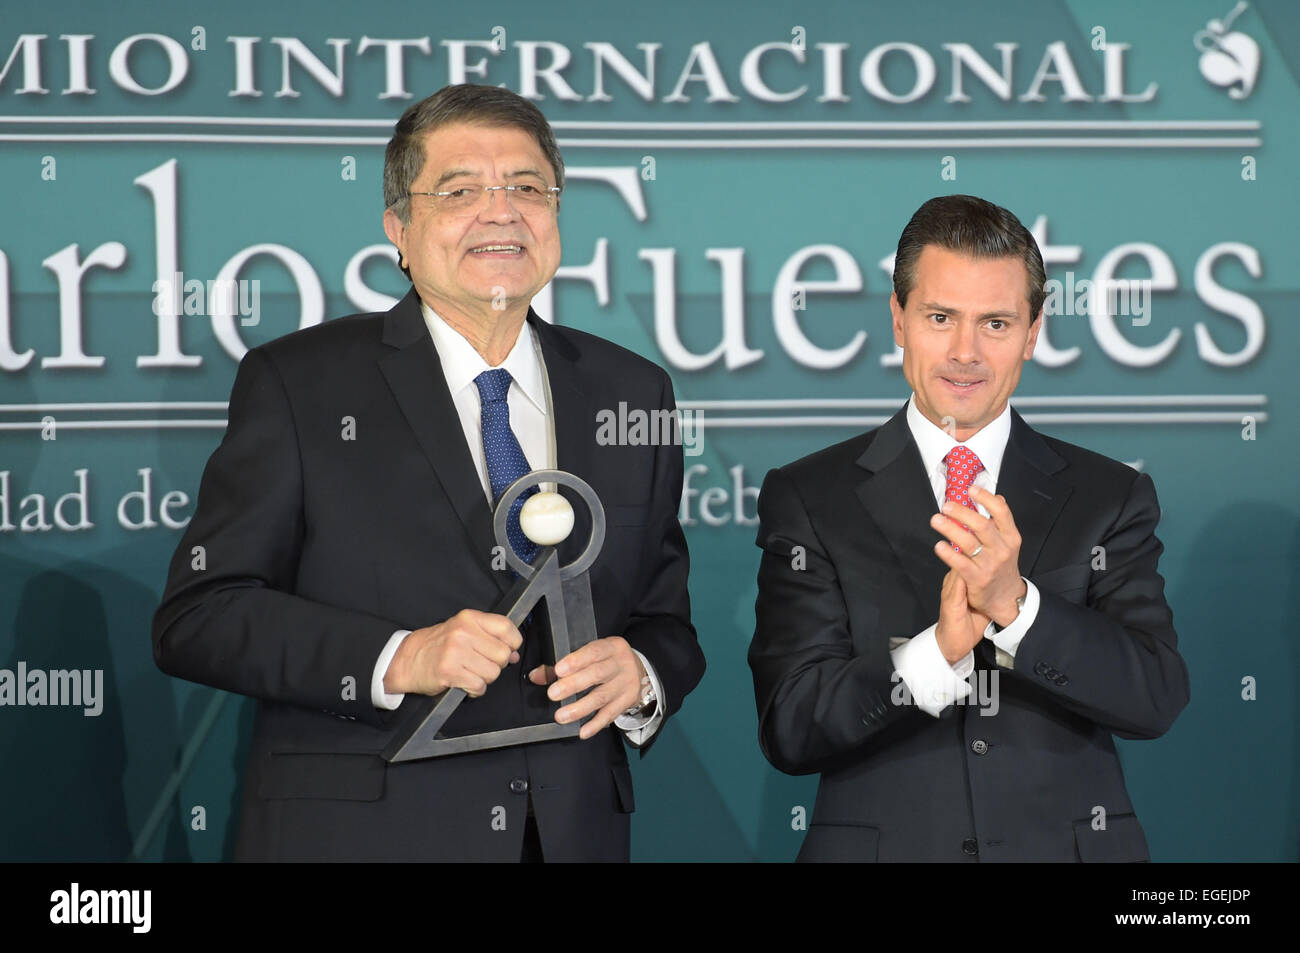 Mexico City. 23rd Feb, 2015. Image provided by Mexico's Presidency shows Mexican President Enrique Pena Nieto (R) and Nicaragua's writer Sergio Ramirez attending the awarding ceremony of the Carlos Fuentes International Award for Literary Creation in Spanish Language at the National Museum of Antropology and History in Mexico City Feb. 23, 2015. © Mexico's Presidency/Xinhua/Alamy Live News Stock Photo